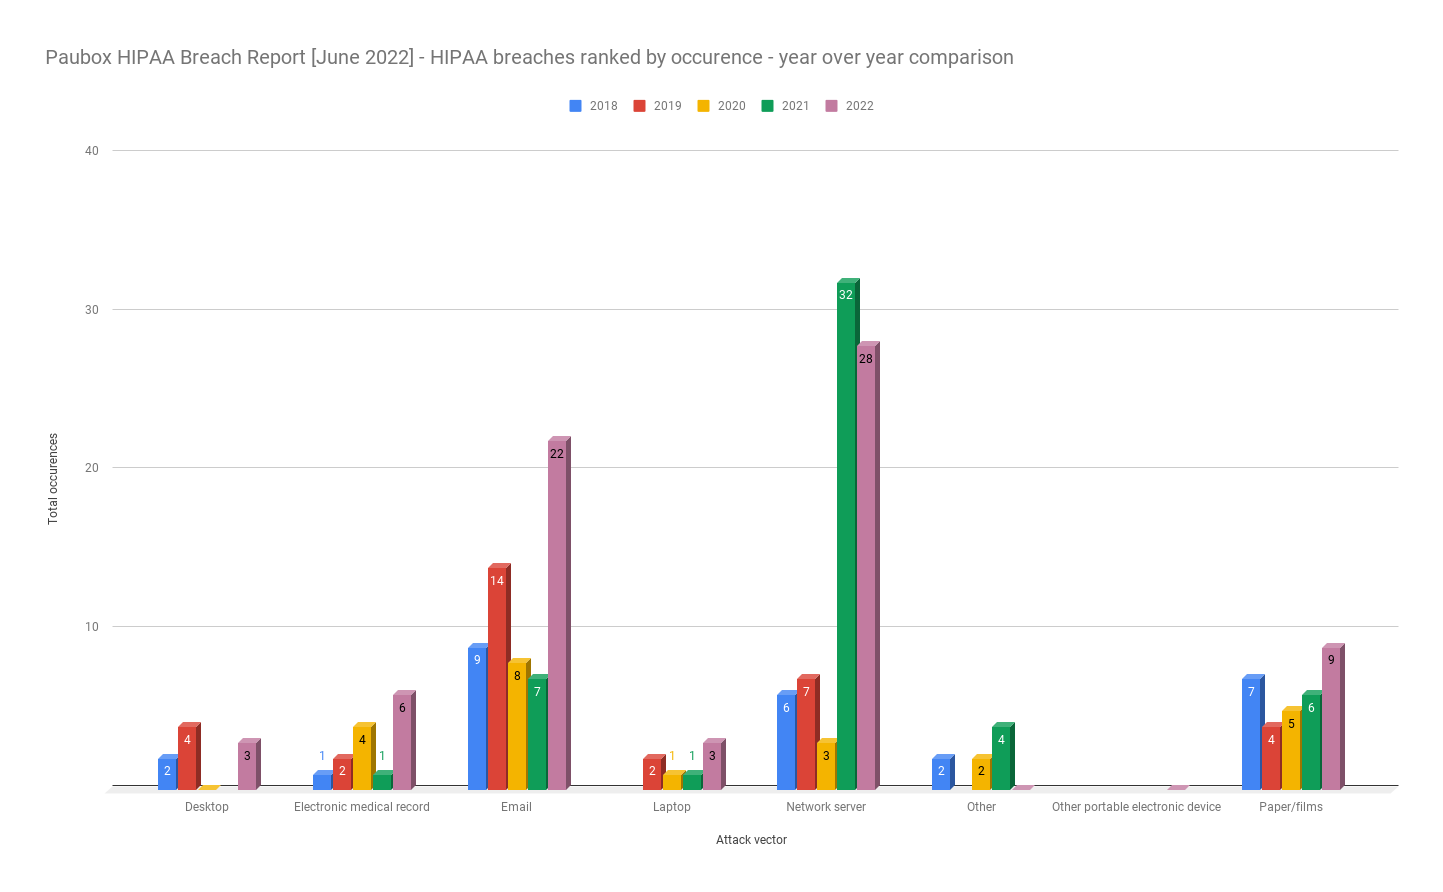 Paubox HIPAA Breach Report [June 2022] - HIPAA breaches ranked by occurence - year over year comparison - Bar graph for 2018, 2019, 2020, 2021 and 2022 for Desktop Computers, Electronic Medical Records, Email, Laptop, Network Server, Other, Other portable Electronic Device and Paper/Films